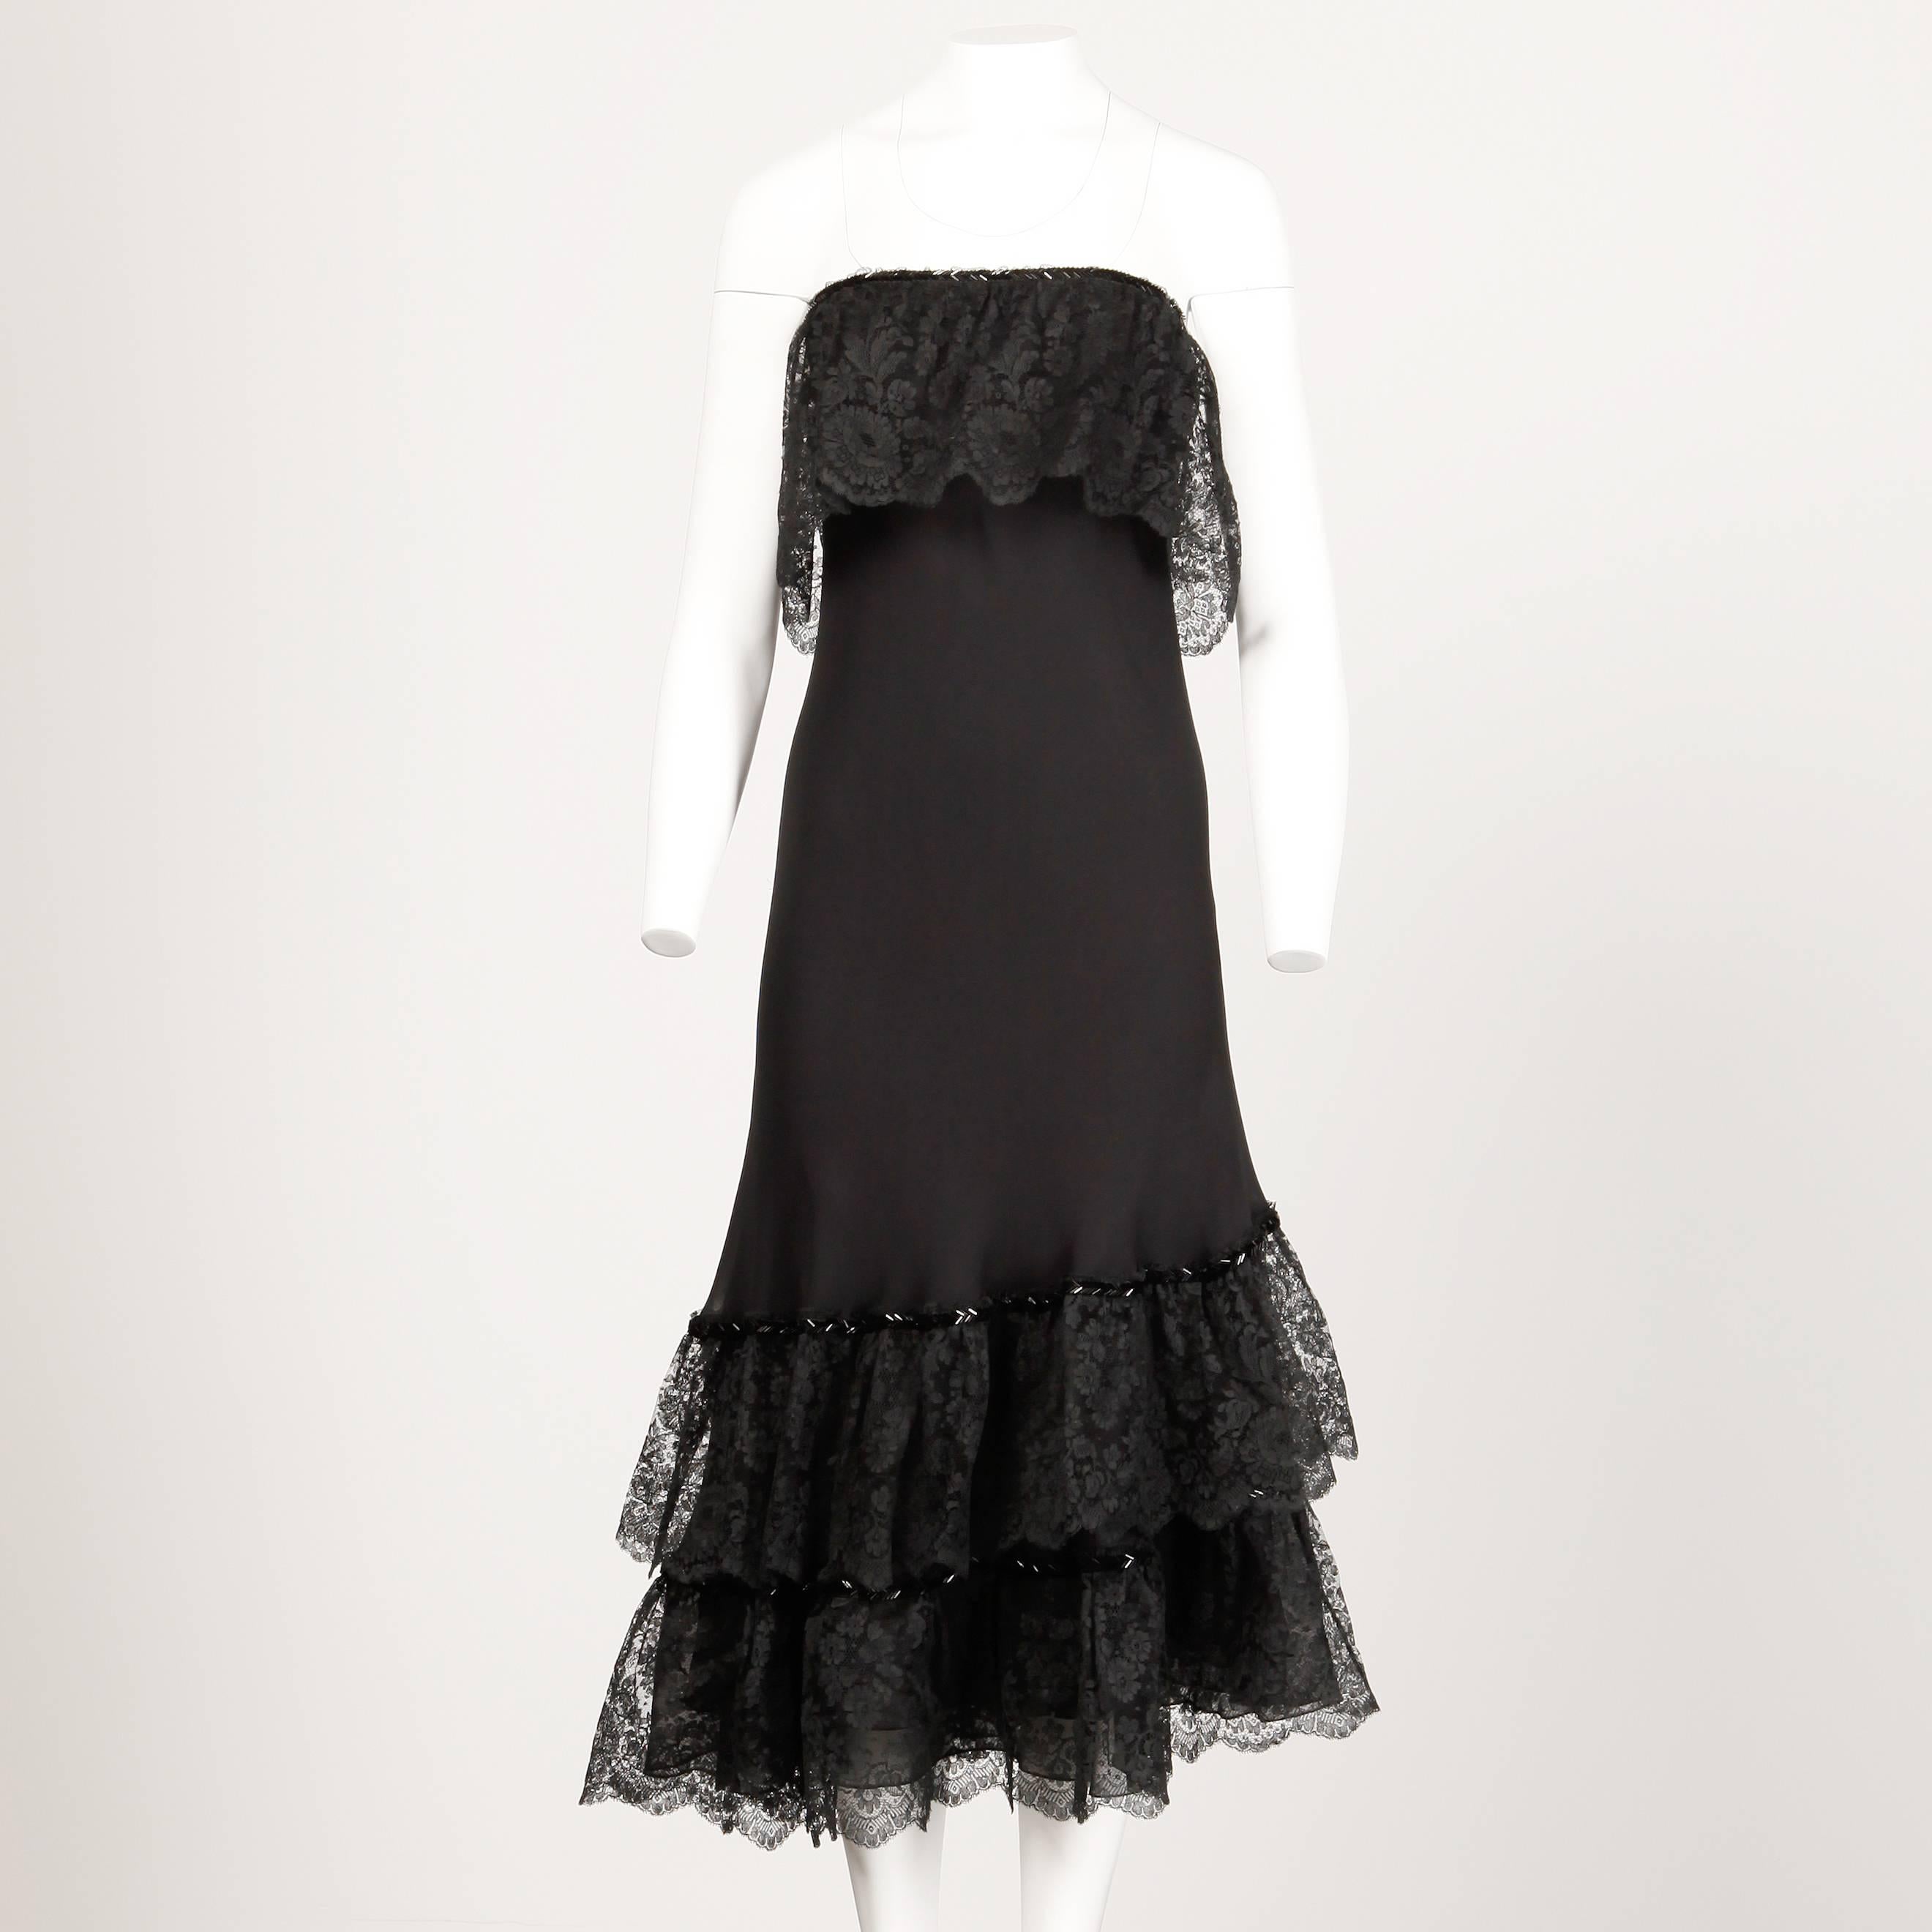 Beautiful delicate black silk strapless dress with beaded lace trim and matching wrap by George Stavropoulos. Flattering cut with asymmetric hemline.

Details: 

Fully Lined in Silk 
Back Zip with Hook Closure
Estimated Size: Small
Color: